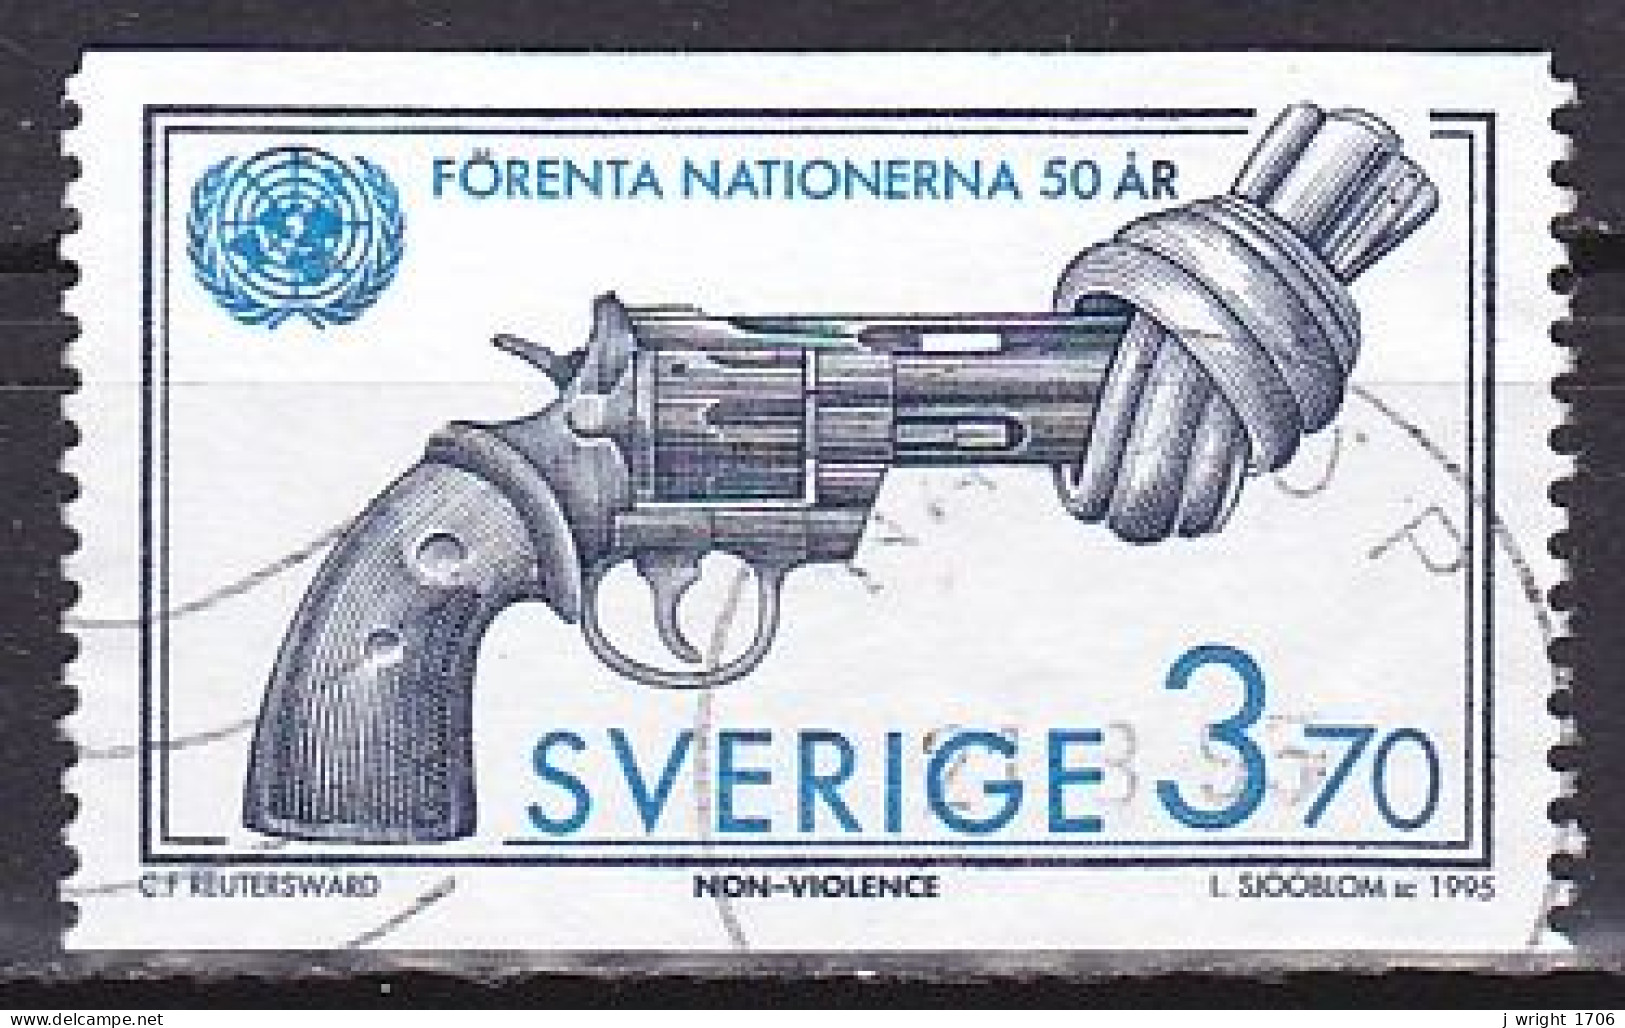 Sweden, 1995, UN 50th Anniv, 3.70kr, USED - Used Stamps